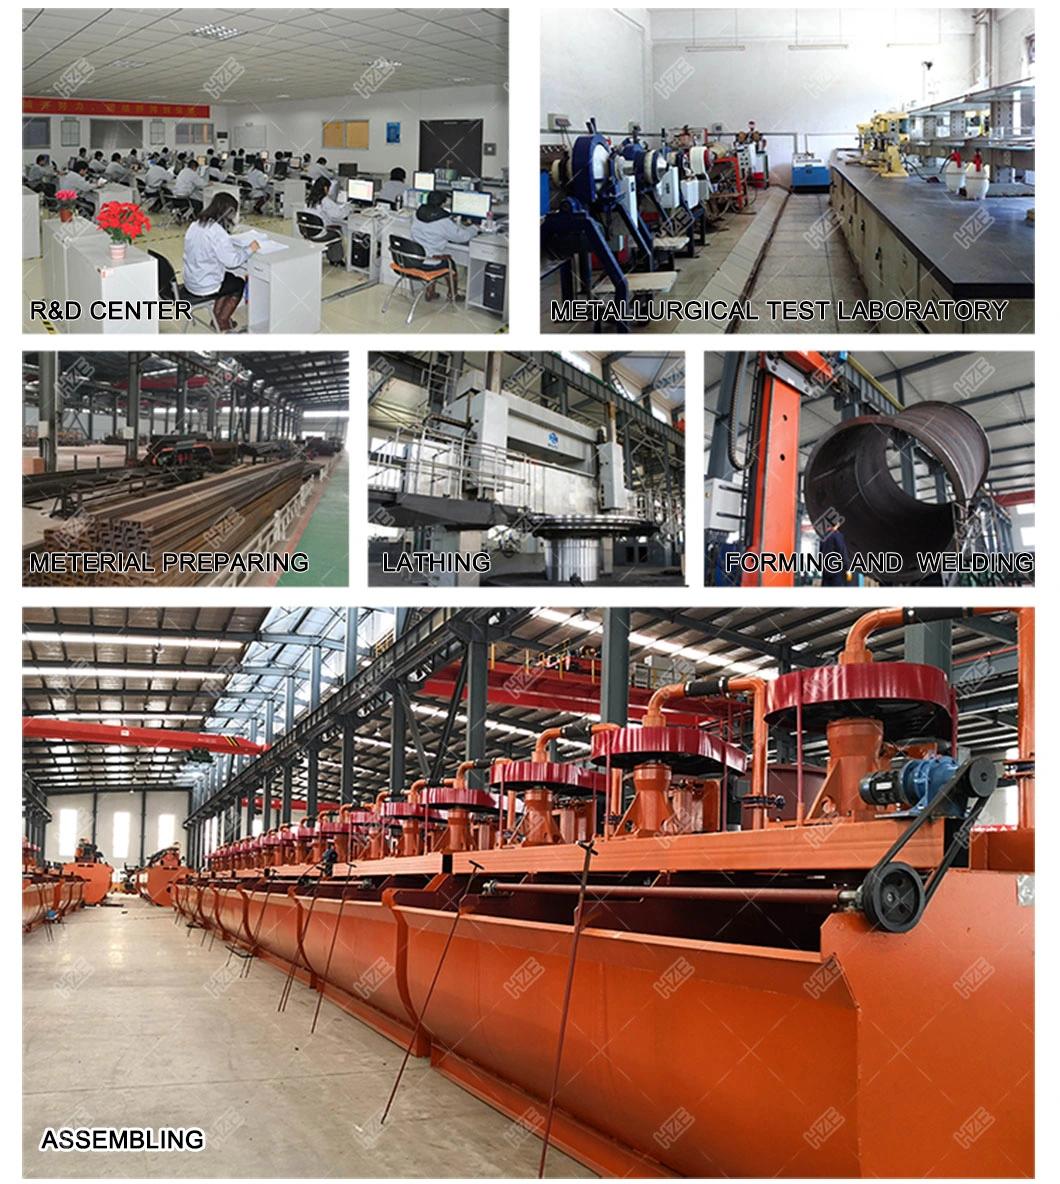 Portable / Movable / Modular Gold Mining Processing Equipment